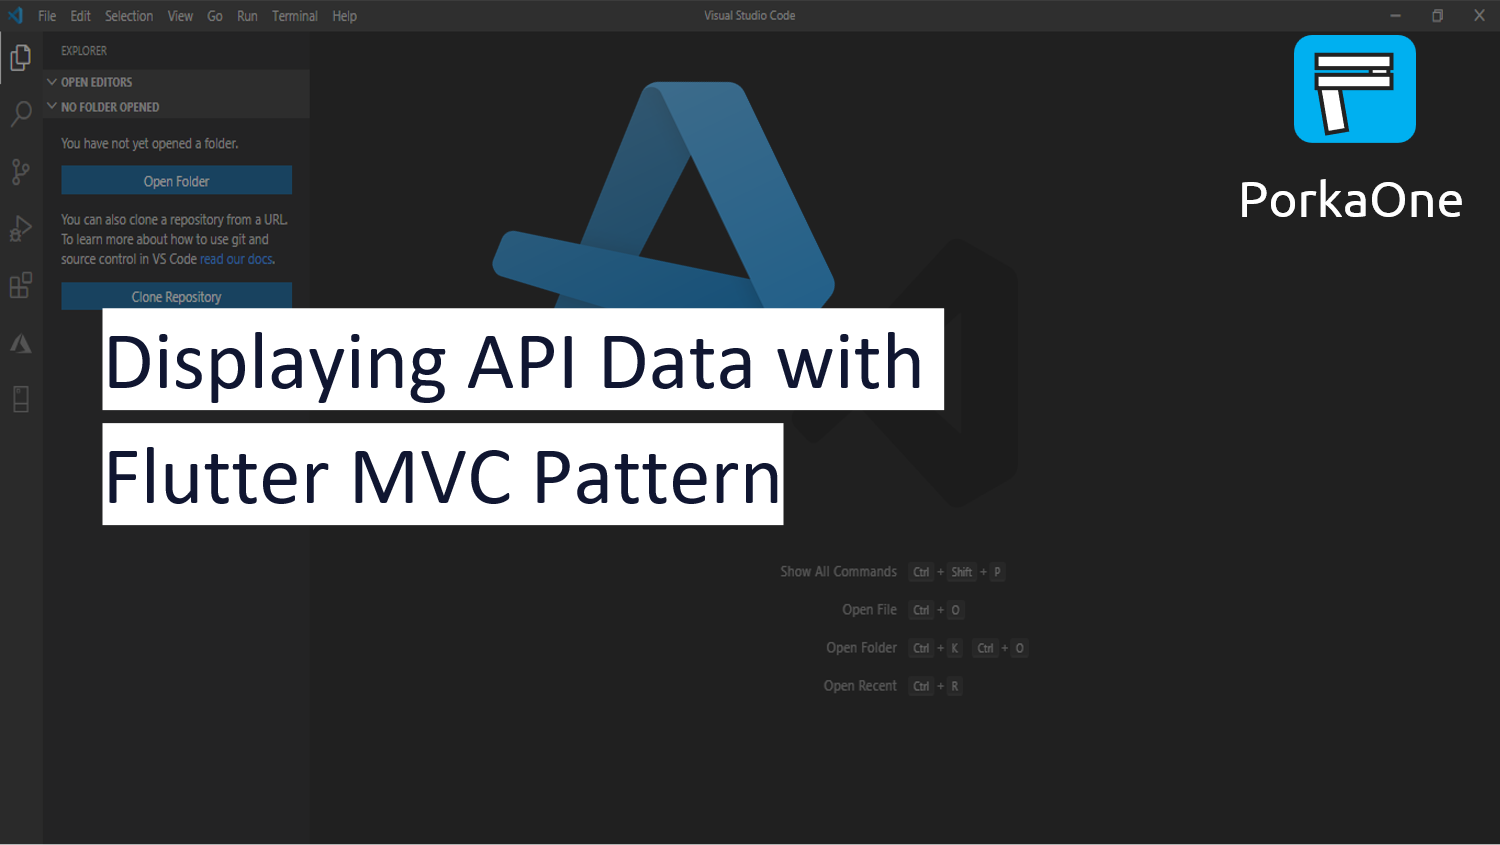 Displaying API Data with Flutter MVC Pattern